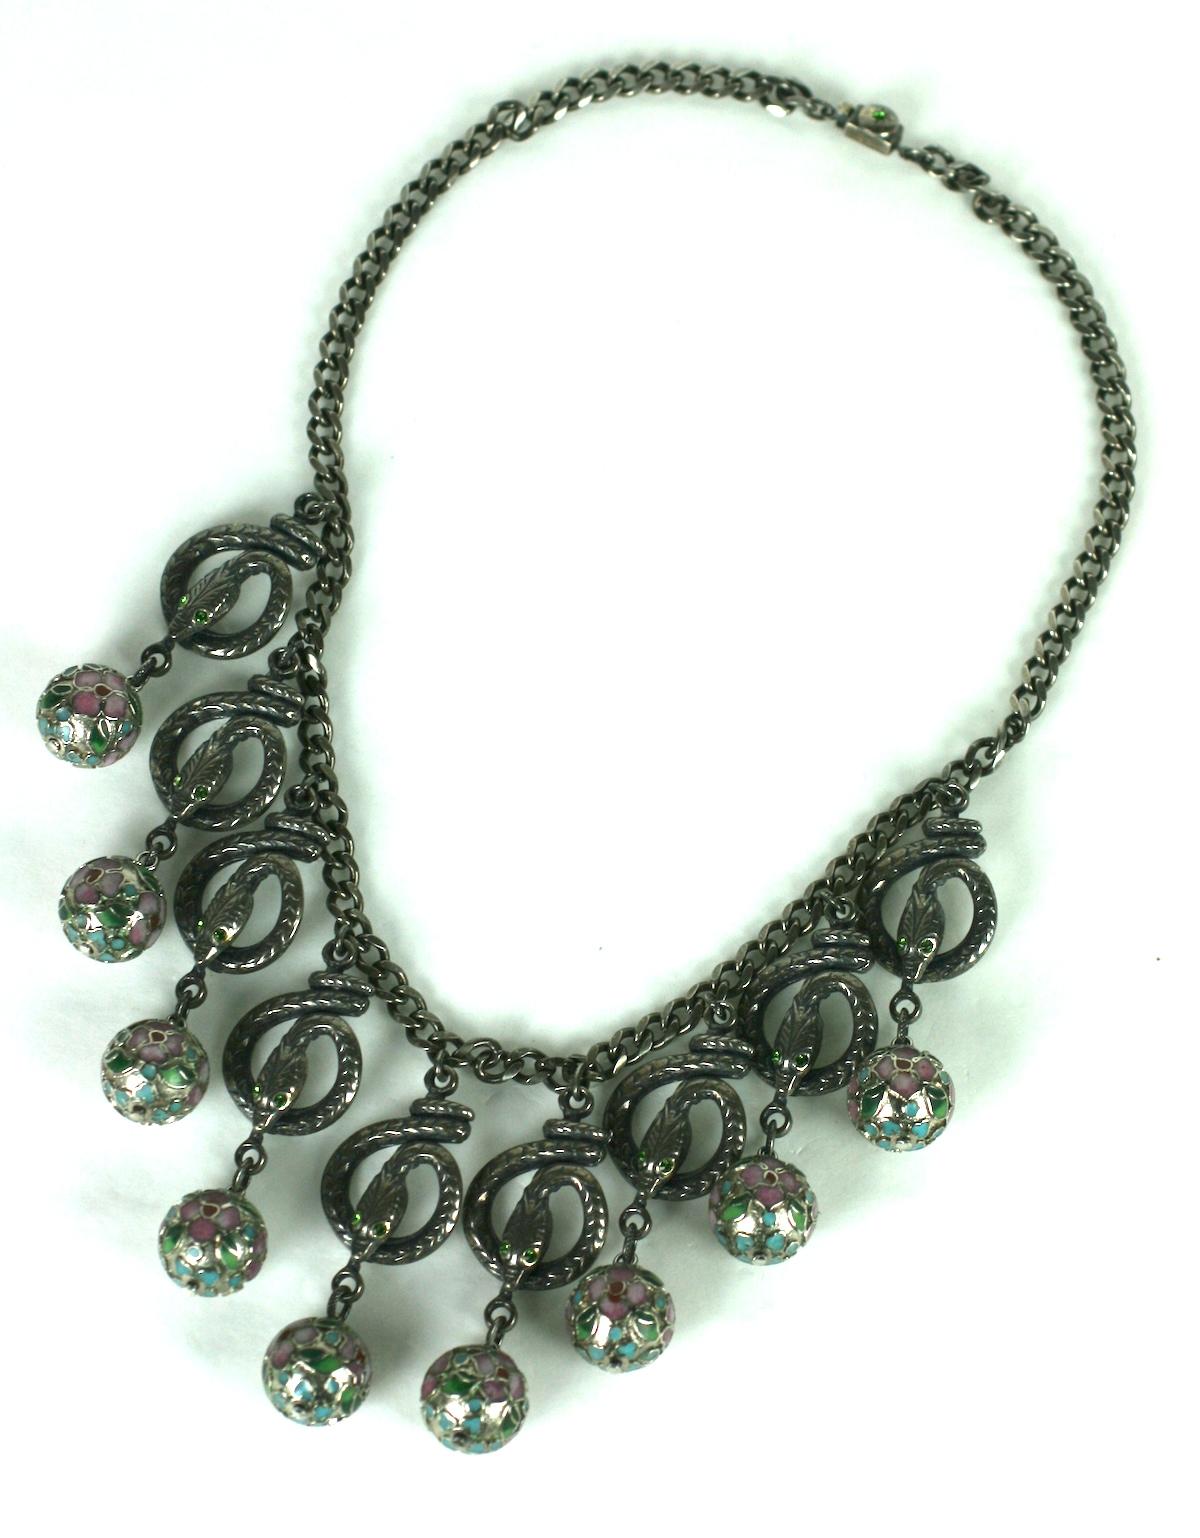 Eygptian Revival Askew London Snake Drop Necklace with enamel cloisonne beads in pale pinks and greens.  Silverplated antique finish. The snakes are set with emerald crystal eyes.
1980's UK.   16